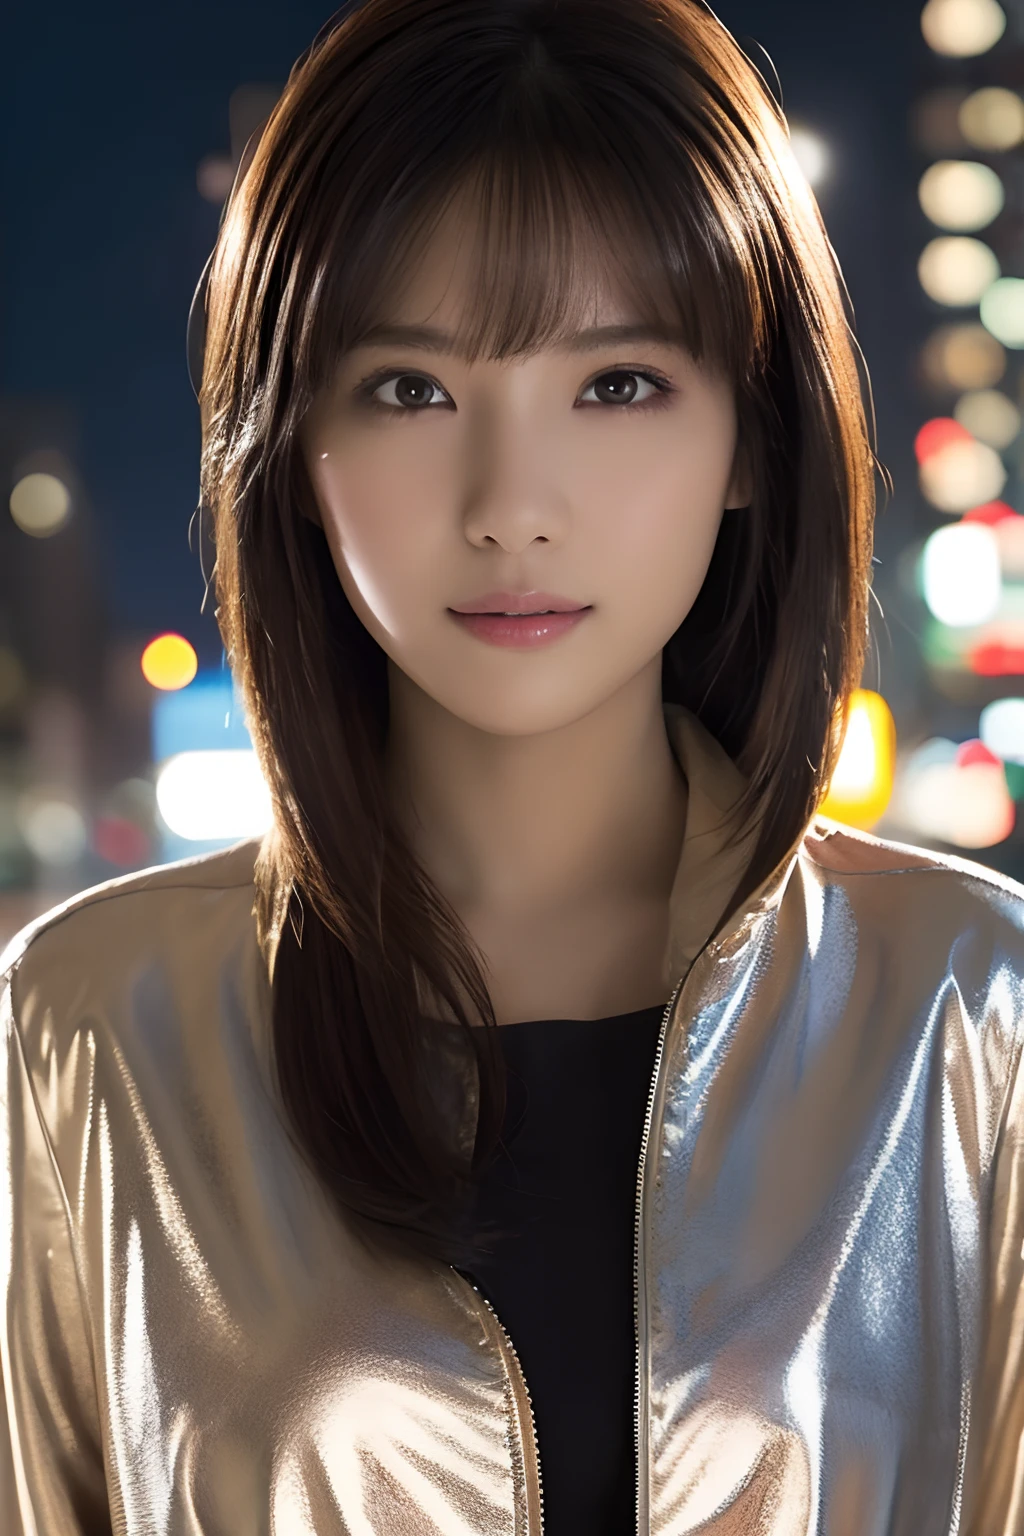 1girl in, (Wear a platinum jacket:1.2), (Raw photo, Best Quality), (Realistic, Photorealsitic:1.4), masutepiece, Extremely delicate and beautiful, Extremely detailed, 2k wallpaper, amazing, finely detail, the Extremely Detailed CG Unity 8K Wallpapers, Ultra-detailed, hight resolution, Soft light, Beautiful detailed girl, extremely detailed eye and face, beautiful detailed nose, Beautiful detailed eyes, Cinematic lighting, city light at night, Perfect Anatomy, Slender body, Taut, 
Straight semi-long hair, Bangs, Looking at Viewer, A slight smil